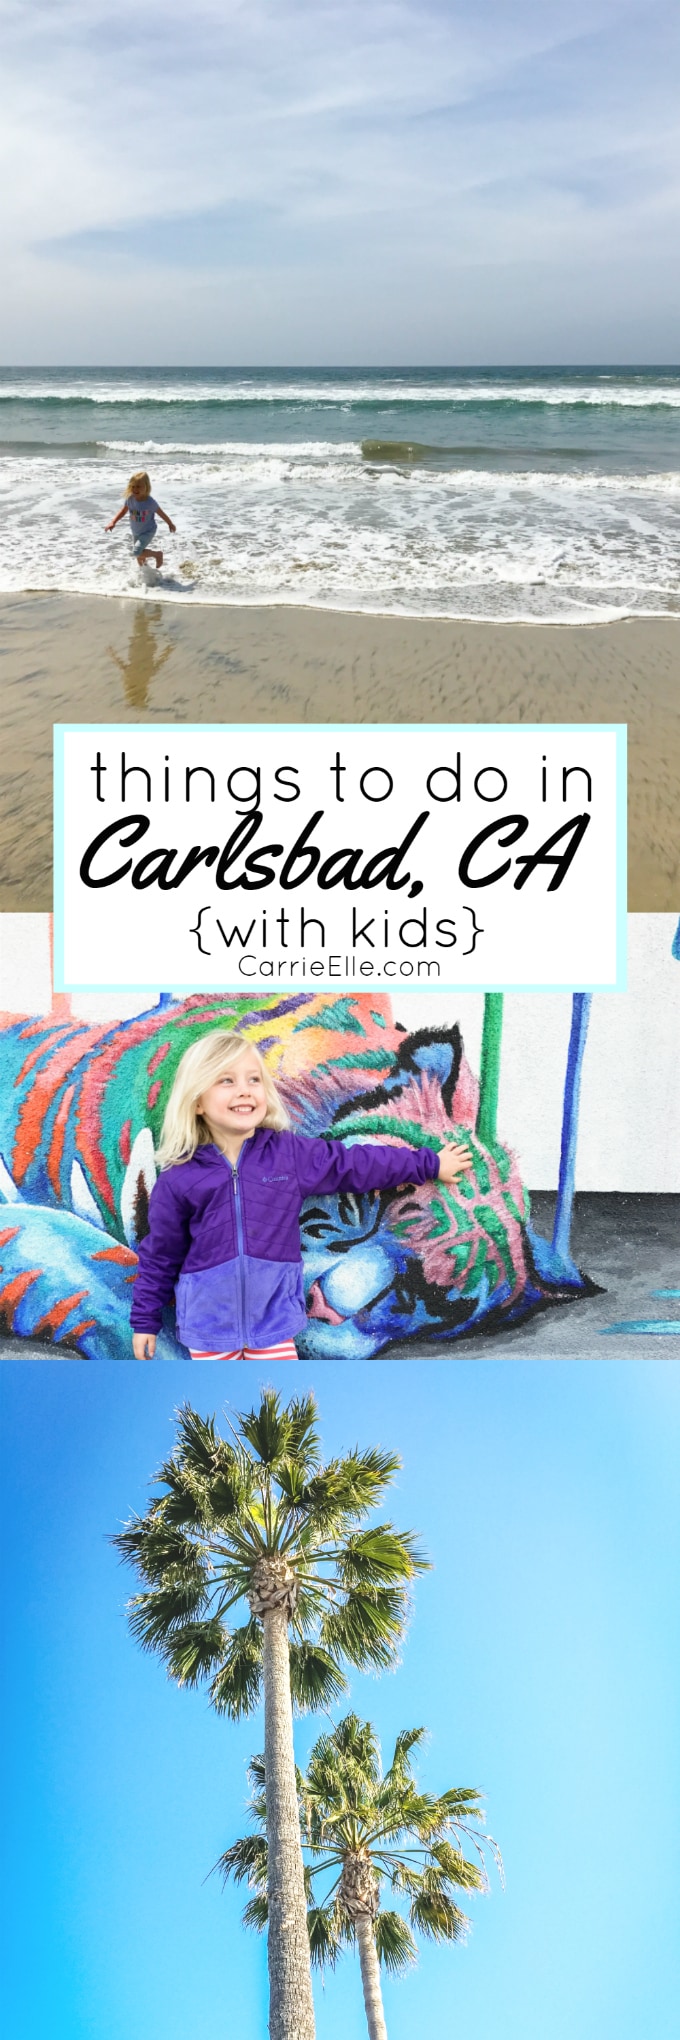 Things to do in Carlsbad, CA with Kids